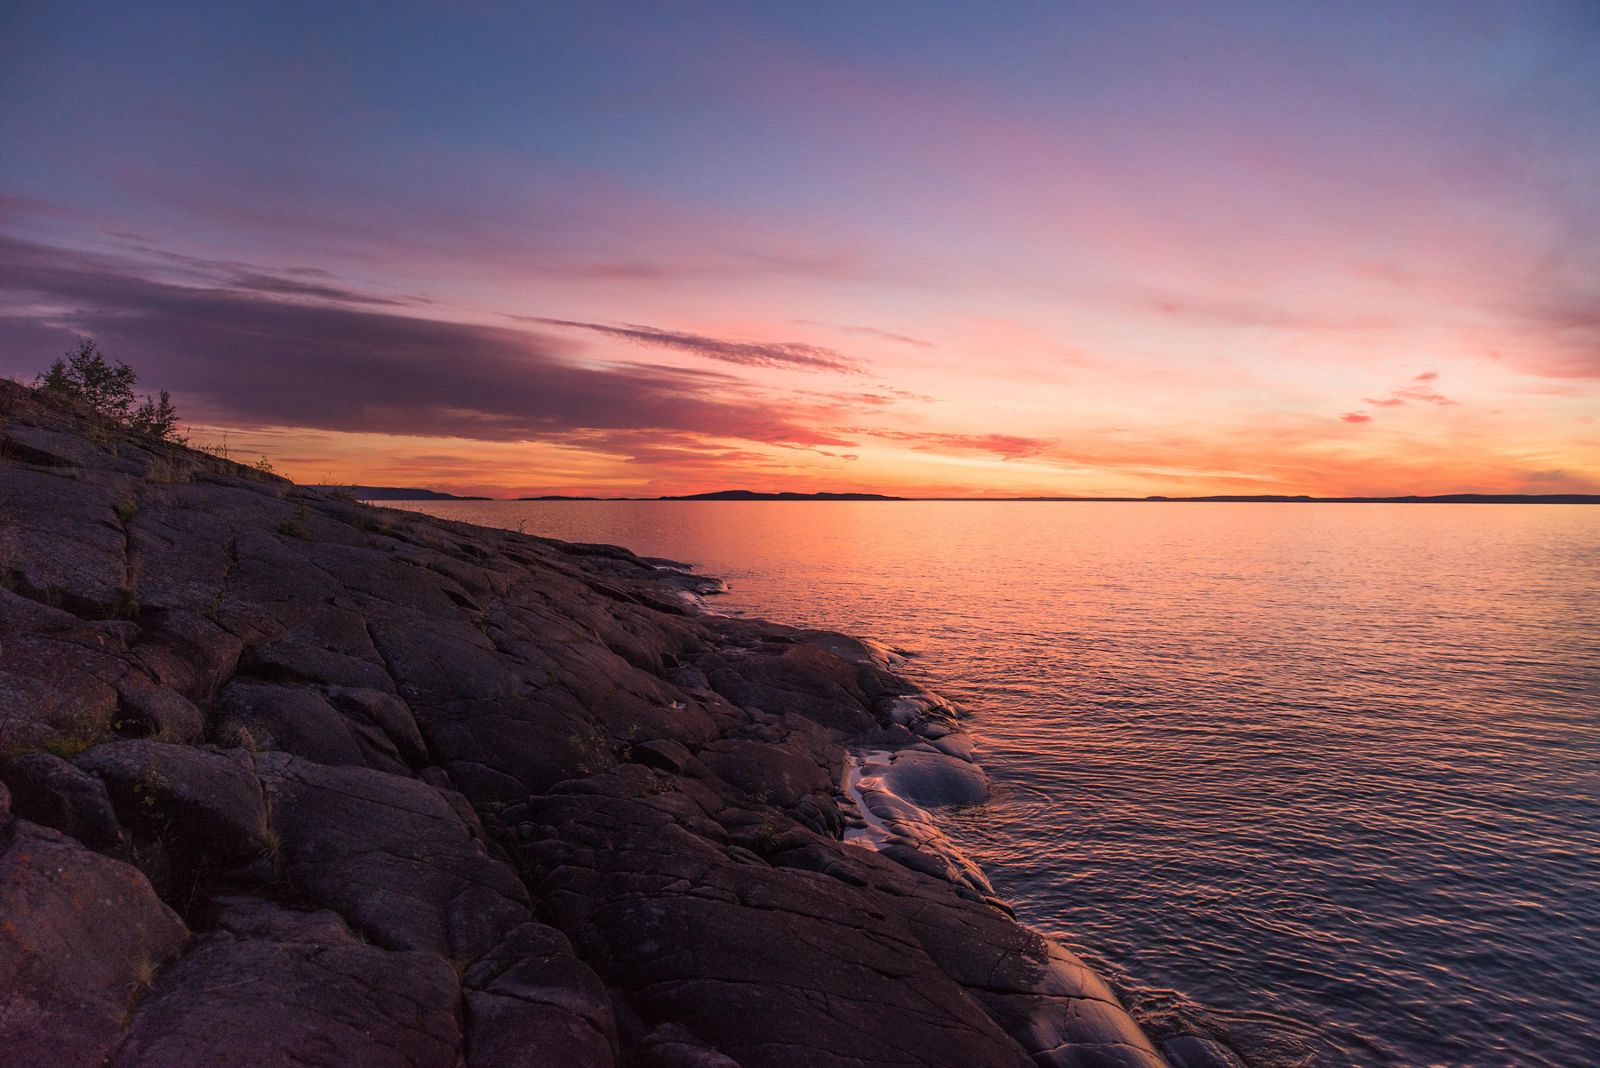 View of rocky coast next to a lake with a colorful sunset in the background